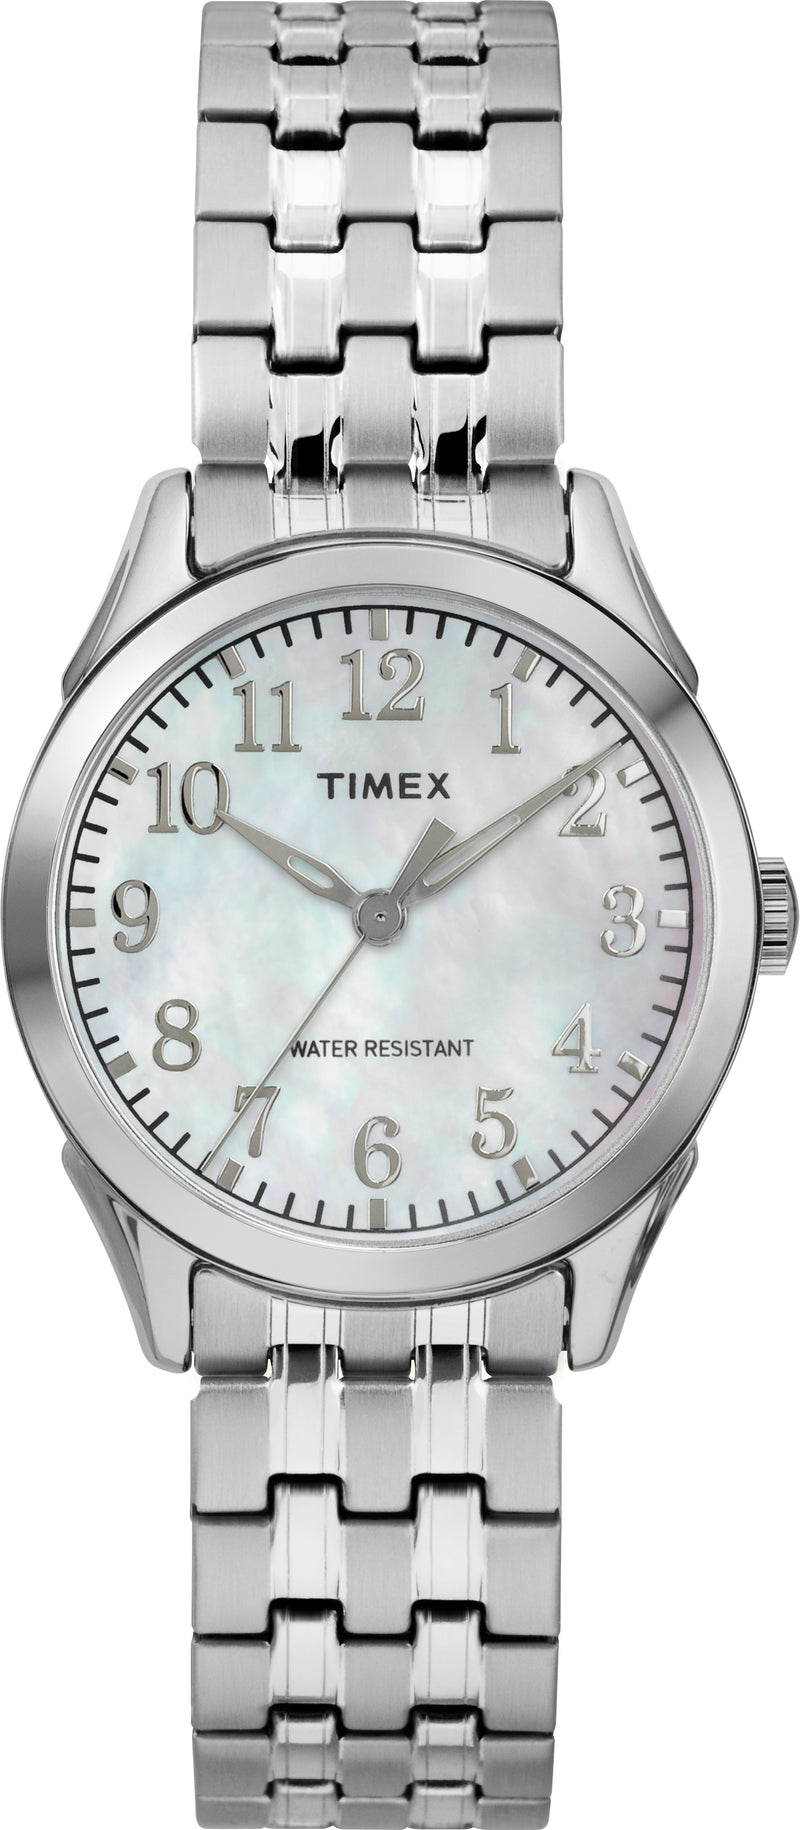 Timex Women's TW2R48300 Briarwood Silver-Tone/MOP Stainless Steel Expansion Band Watch